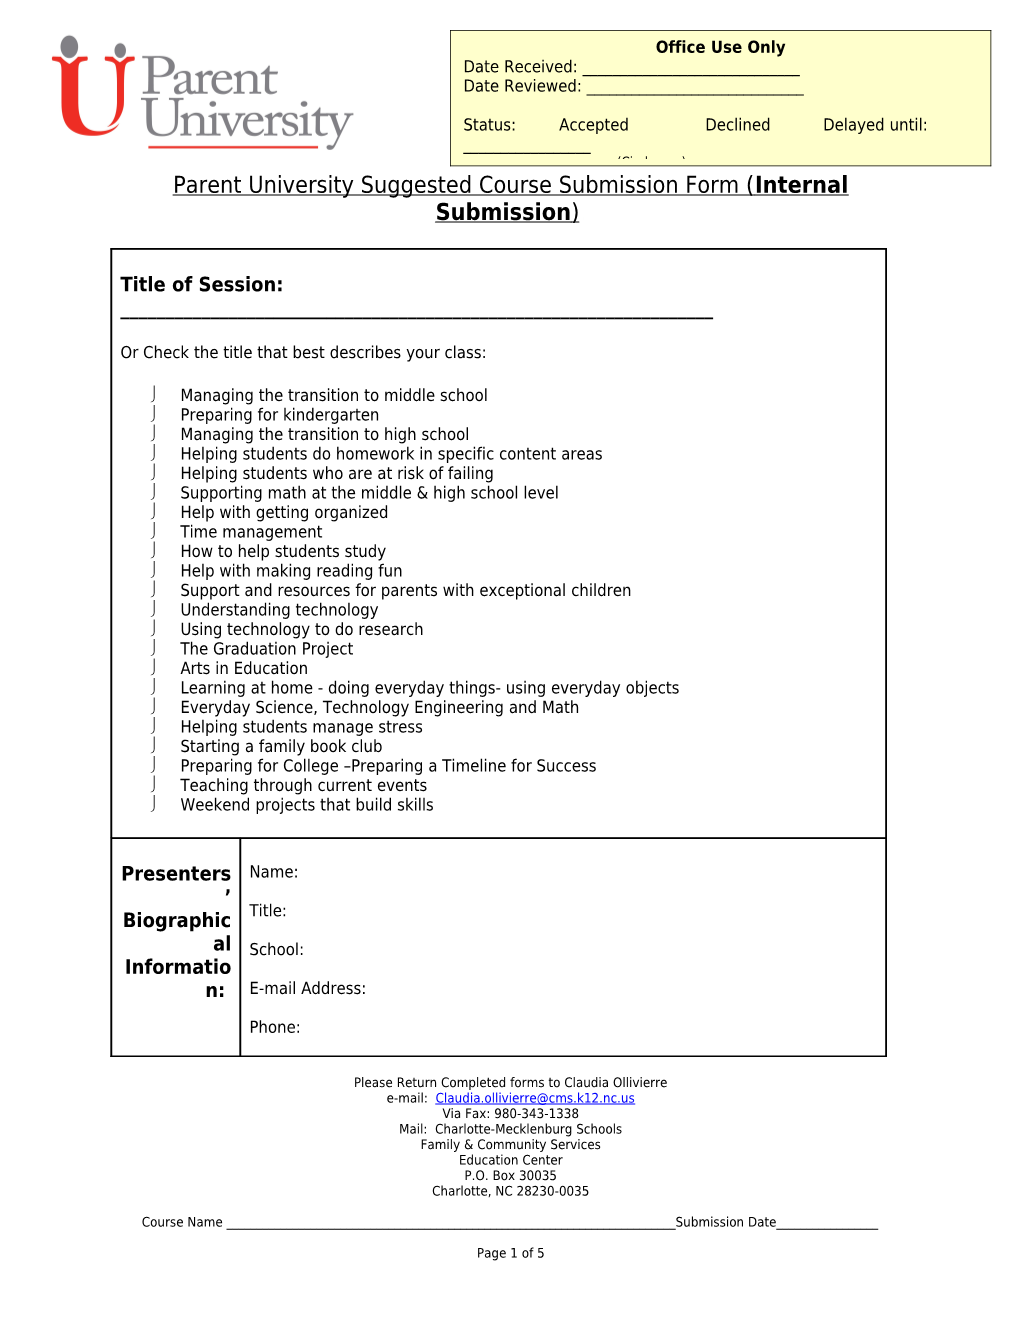 Parent Teen Communication Forum (For Parents and Their Teens)